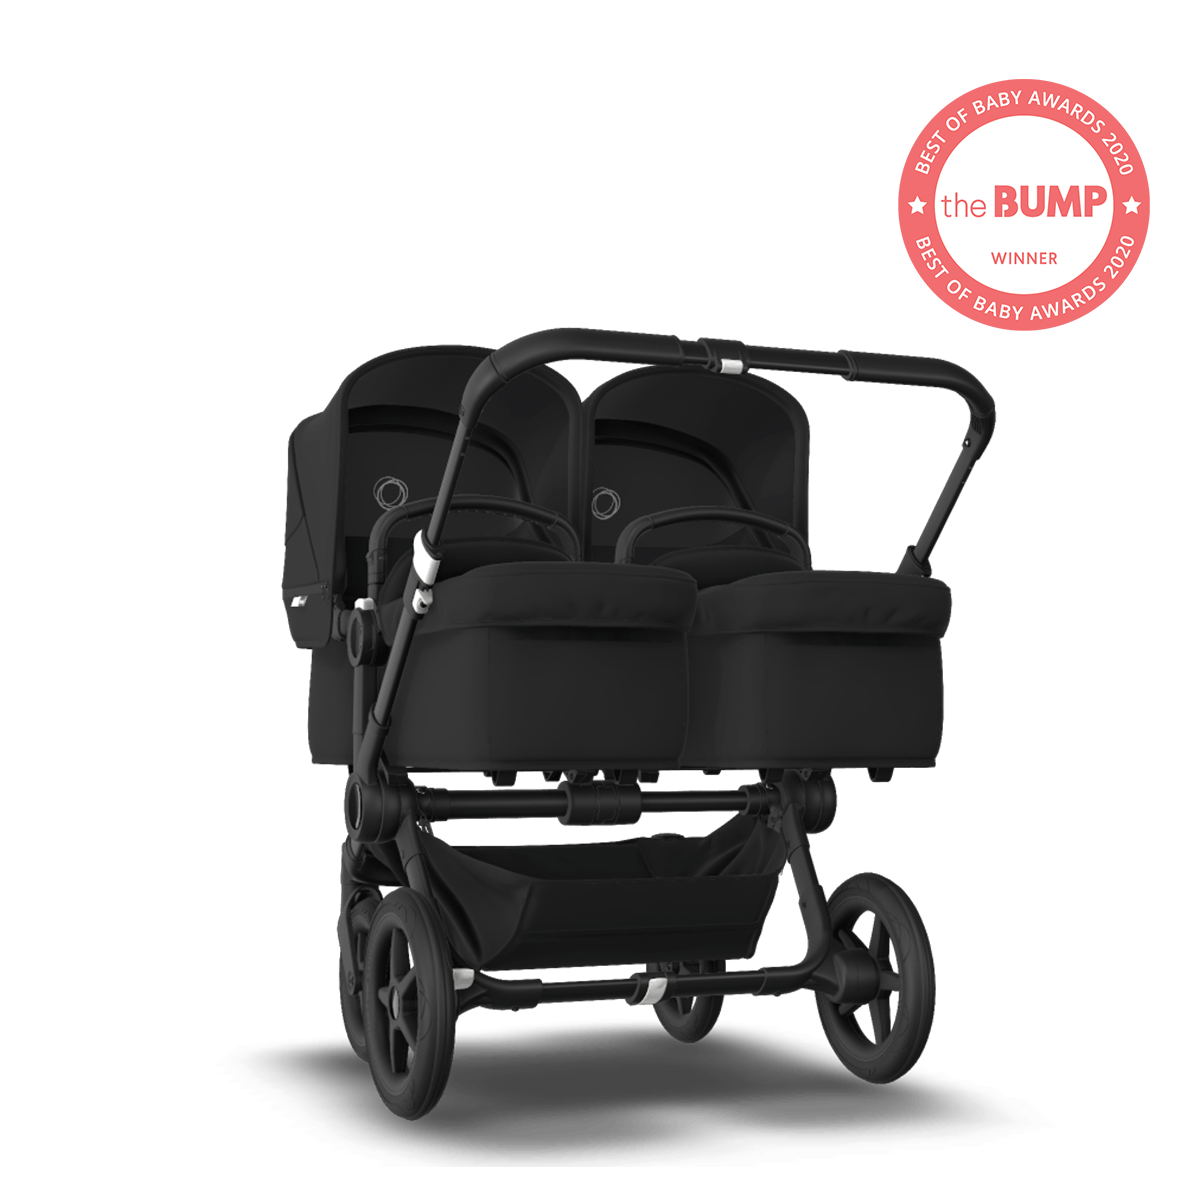 first wheels double stroller